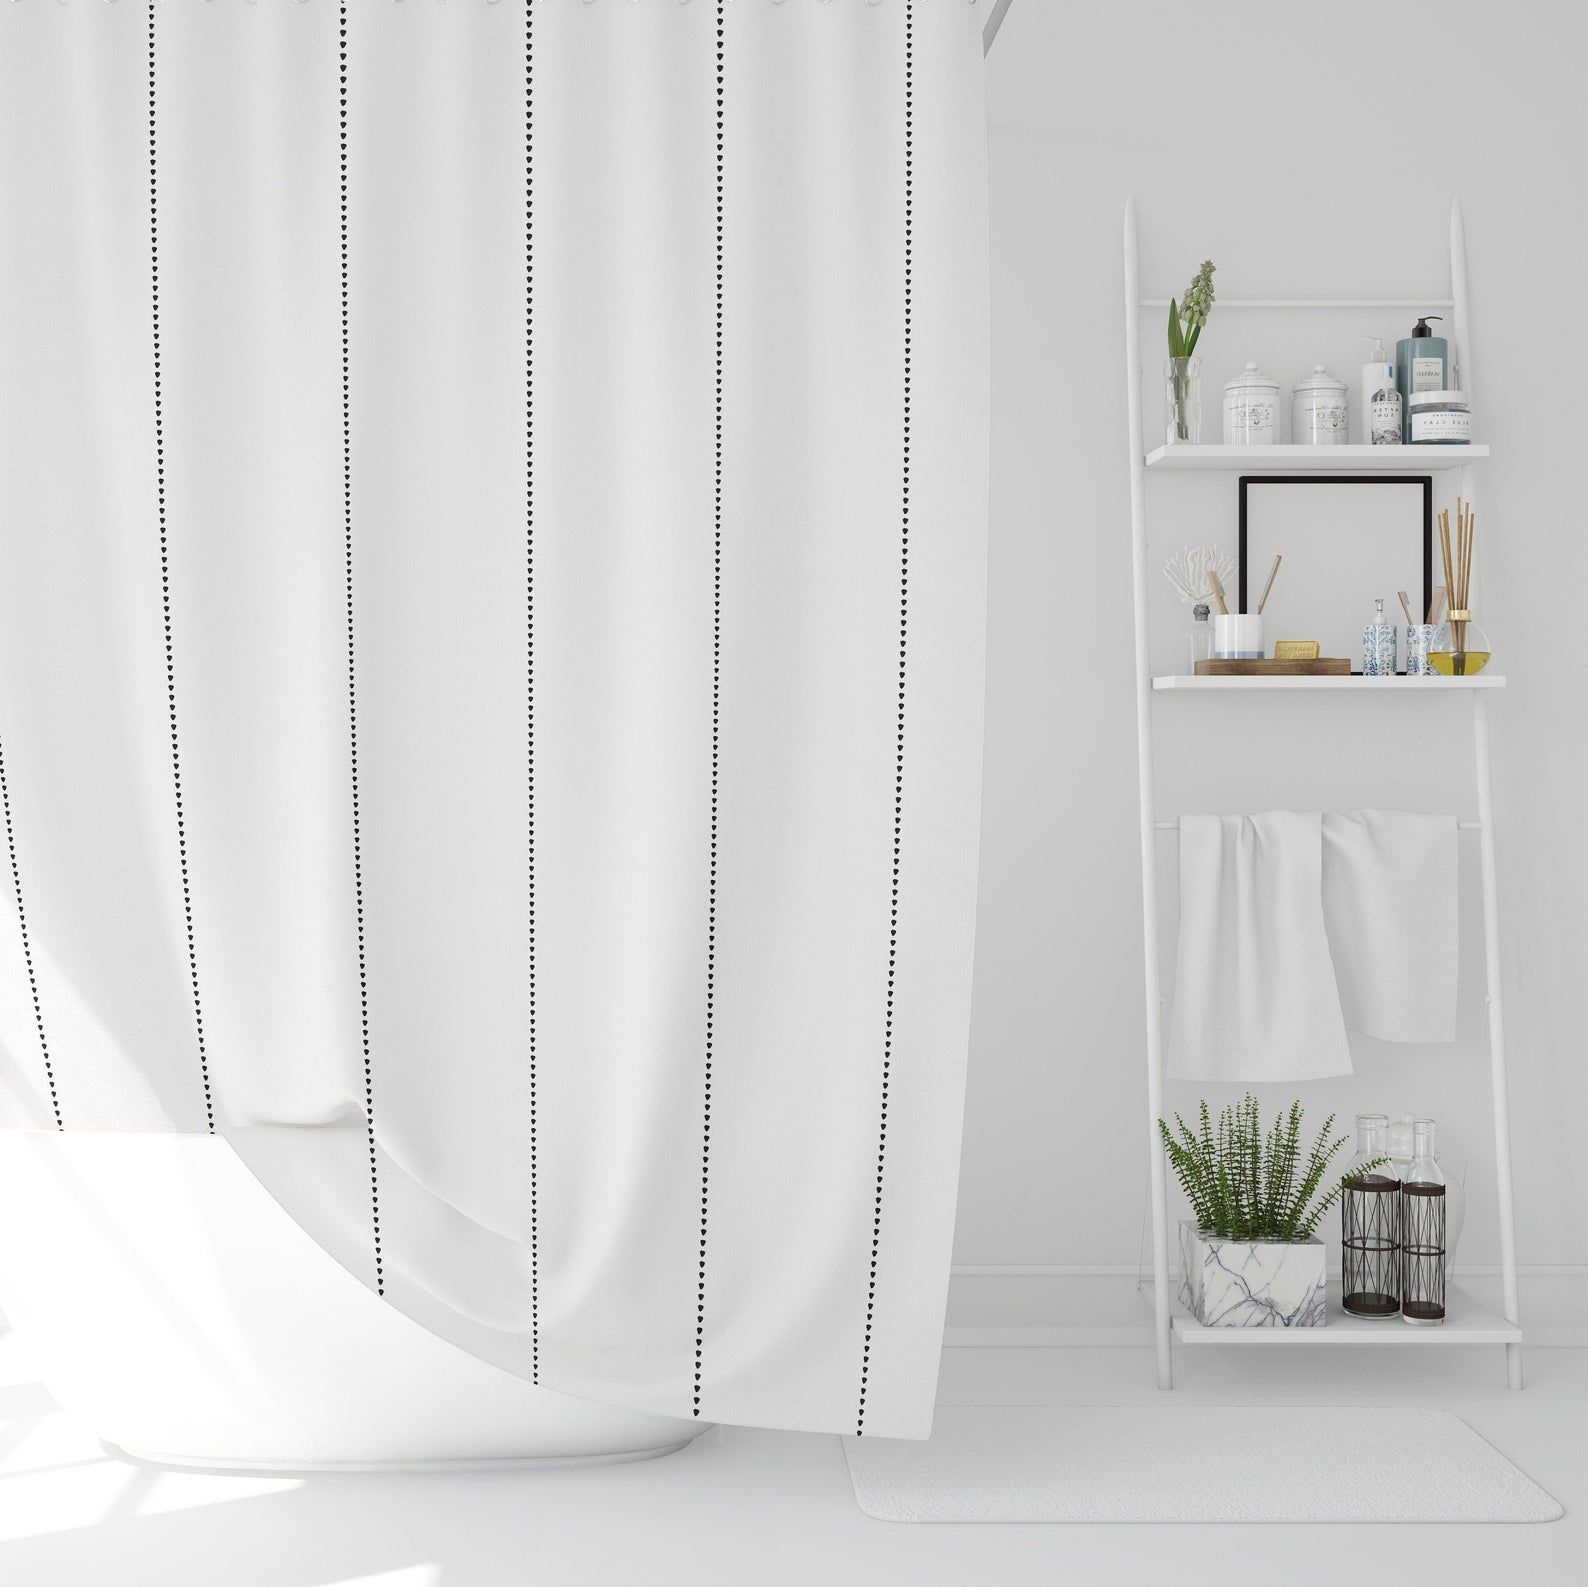 Bring Timeless Elegance to Your Bathroom with a Black and White Striped Shower Curtain